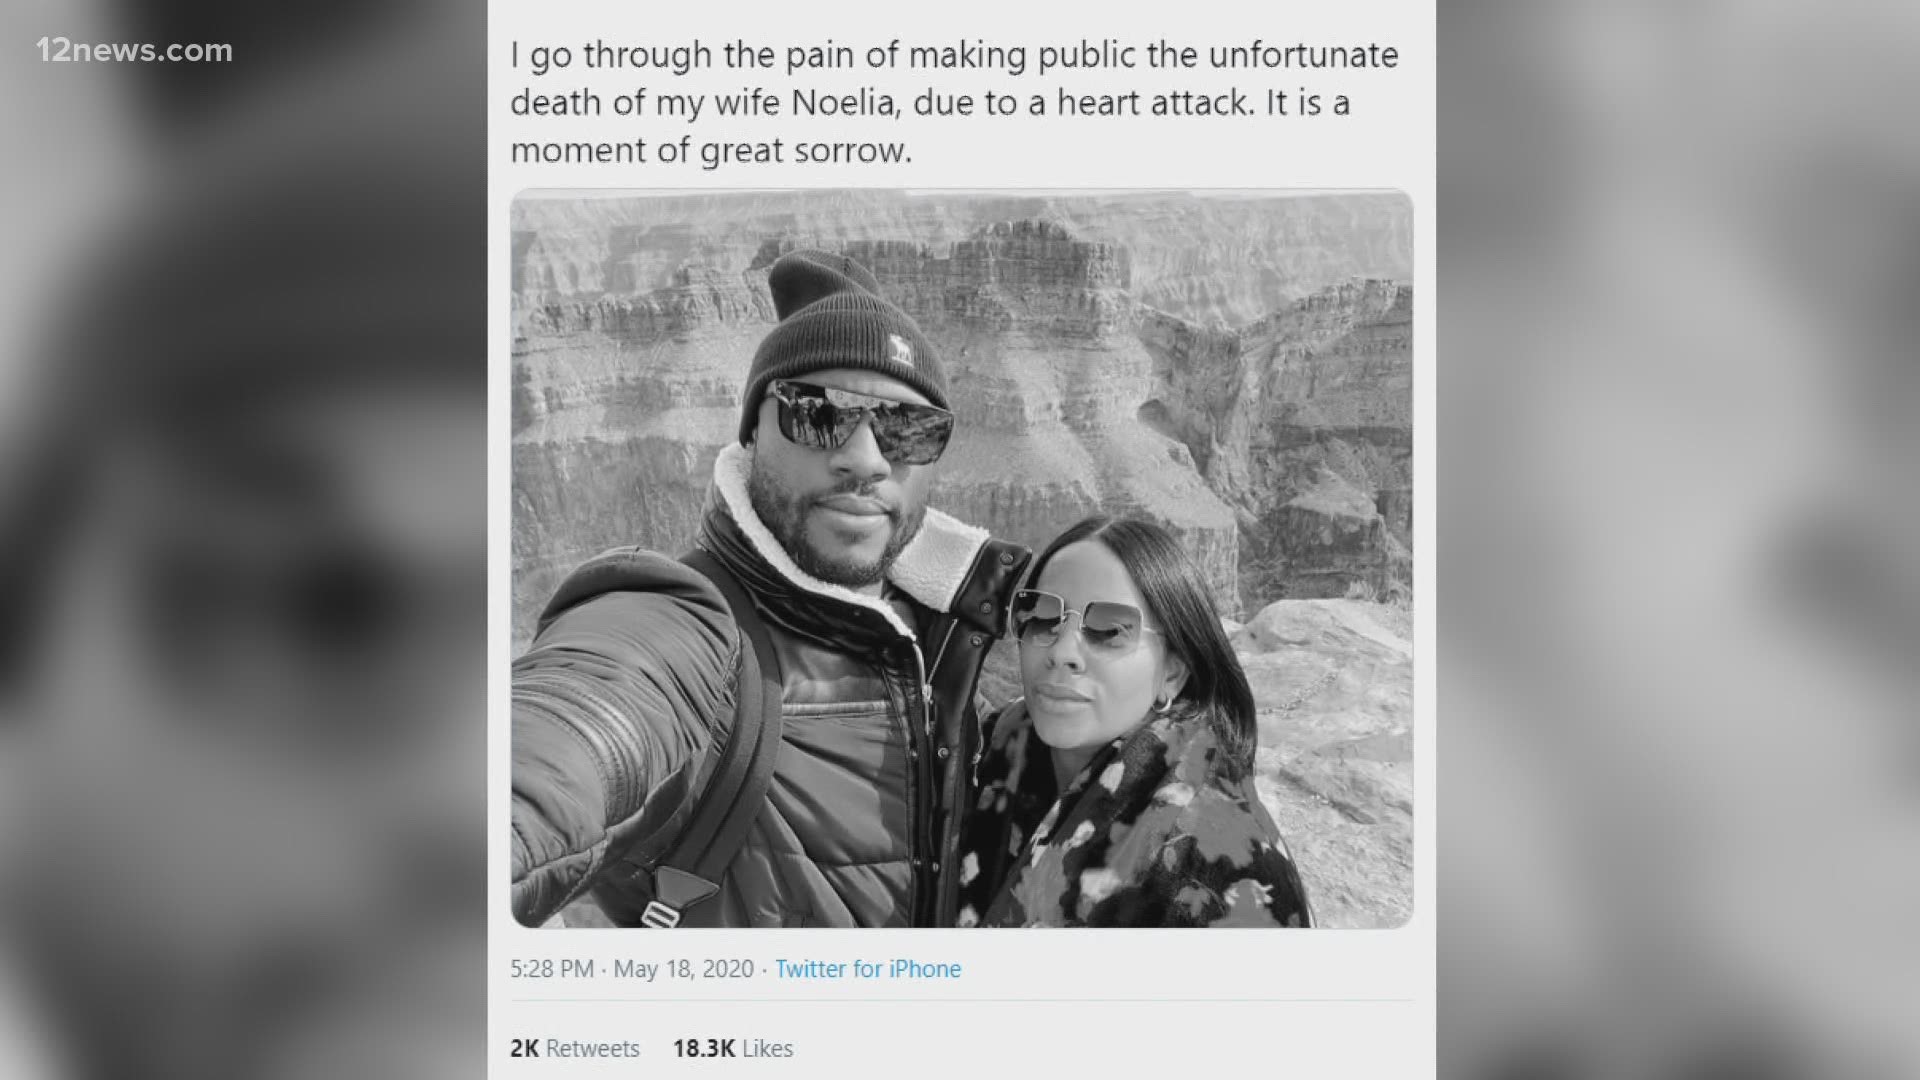 Diamondbacks outfielder Starling Marte announced on social media Monday evening that his wife, Noelia, died of a heart attack.